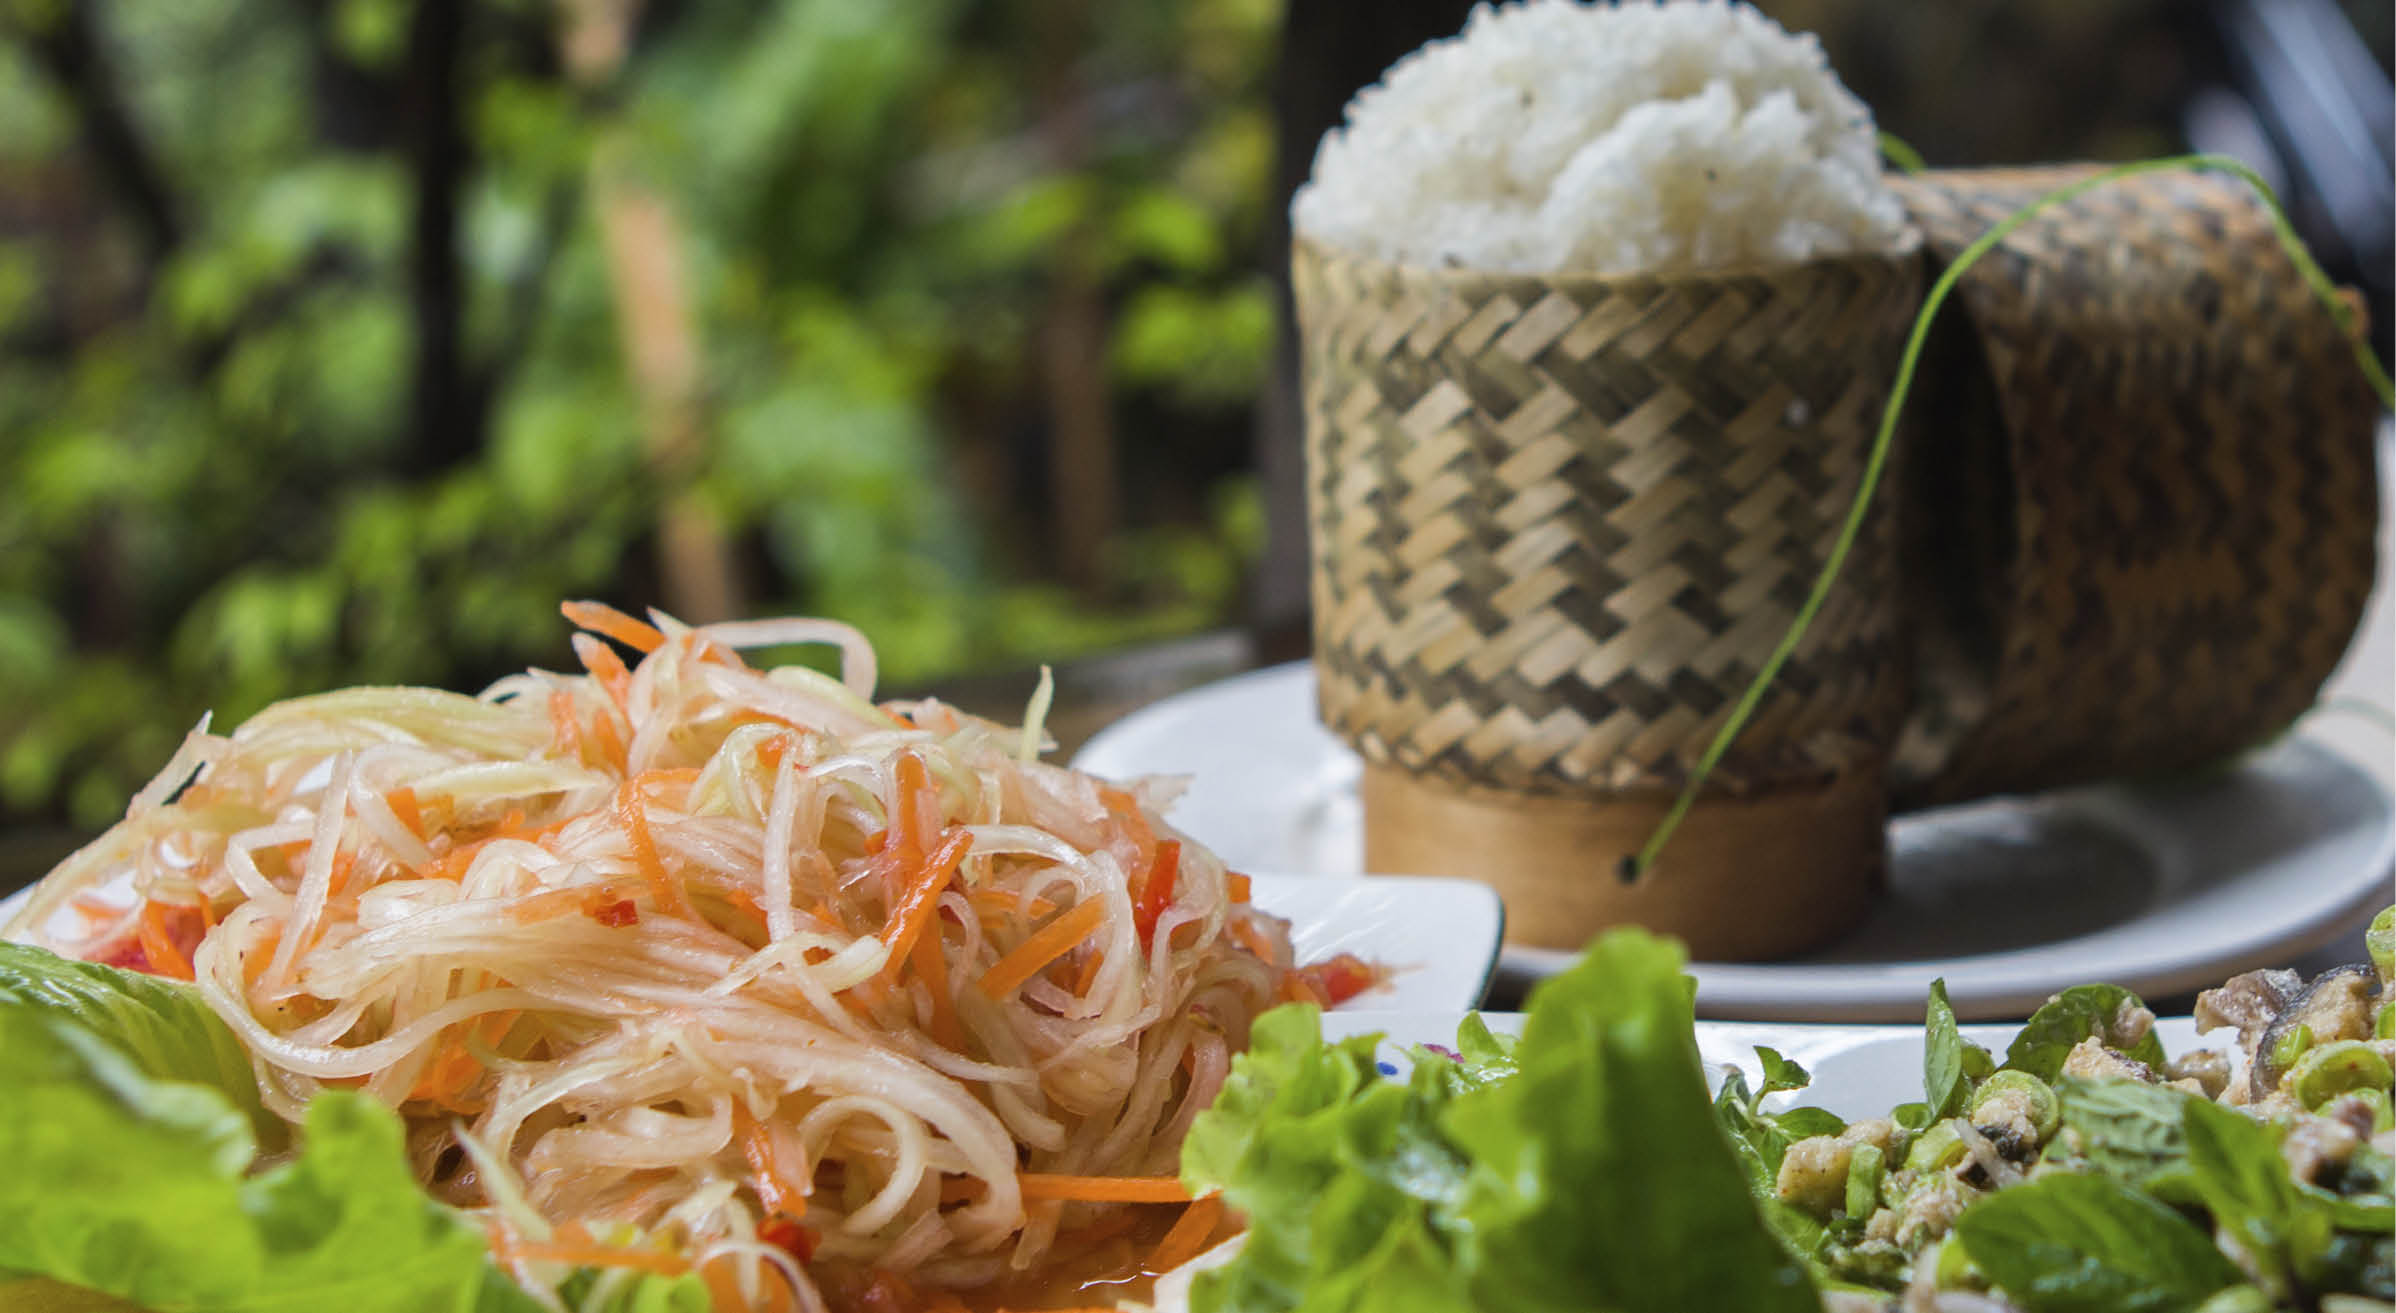 Traditional Lao cuisine: Spicy papaya salad with fish larb and sticky rice in the background. 